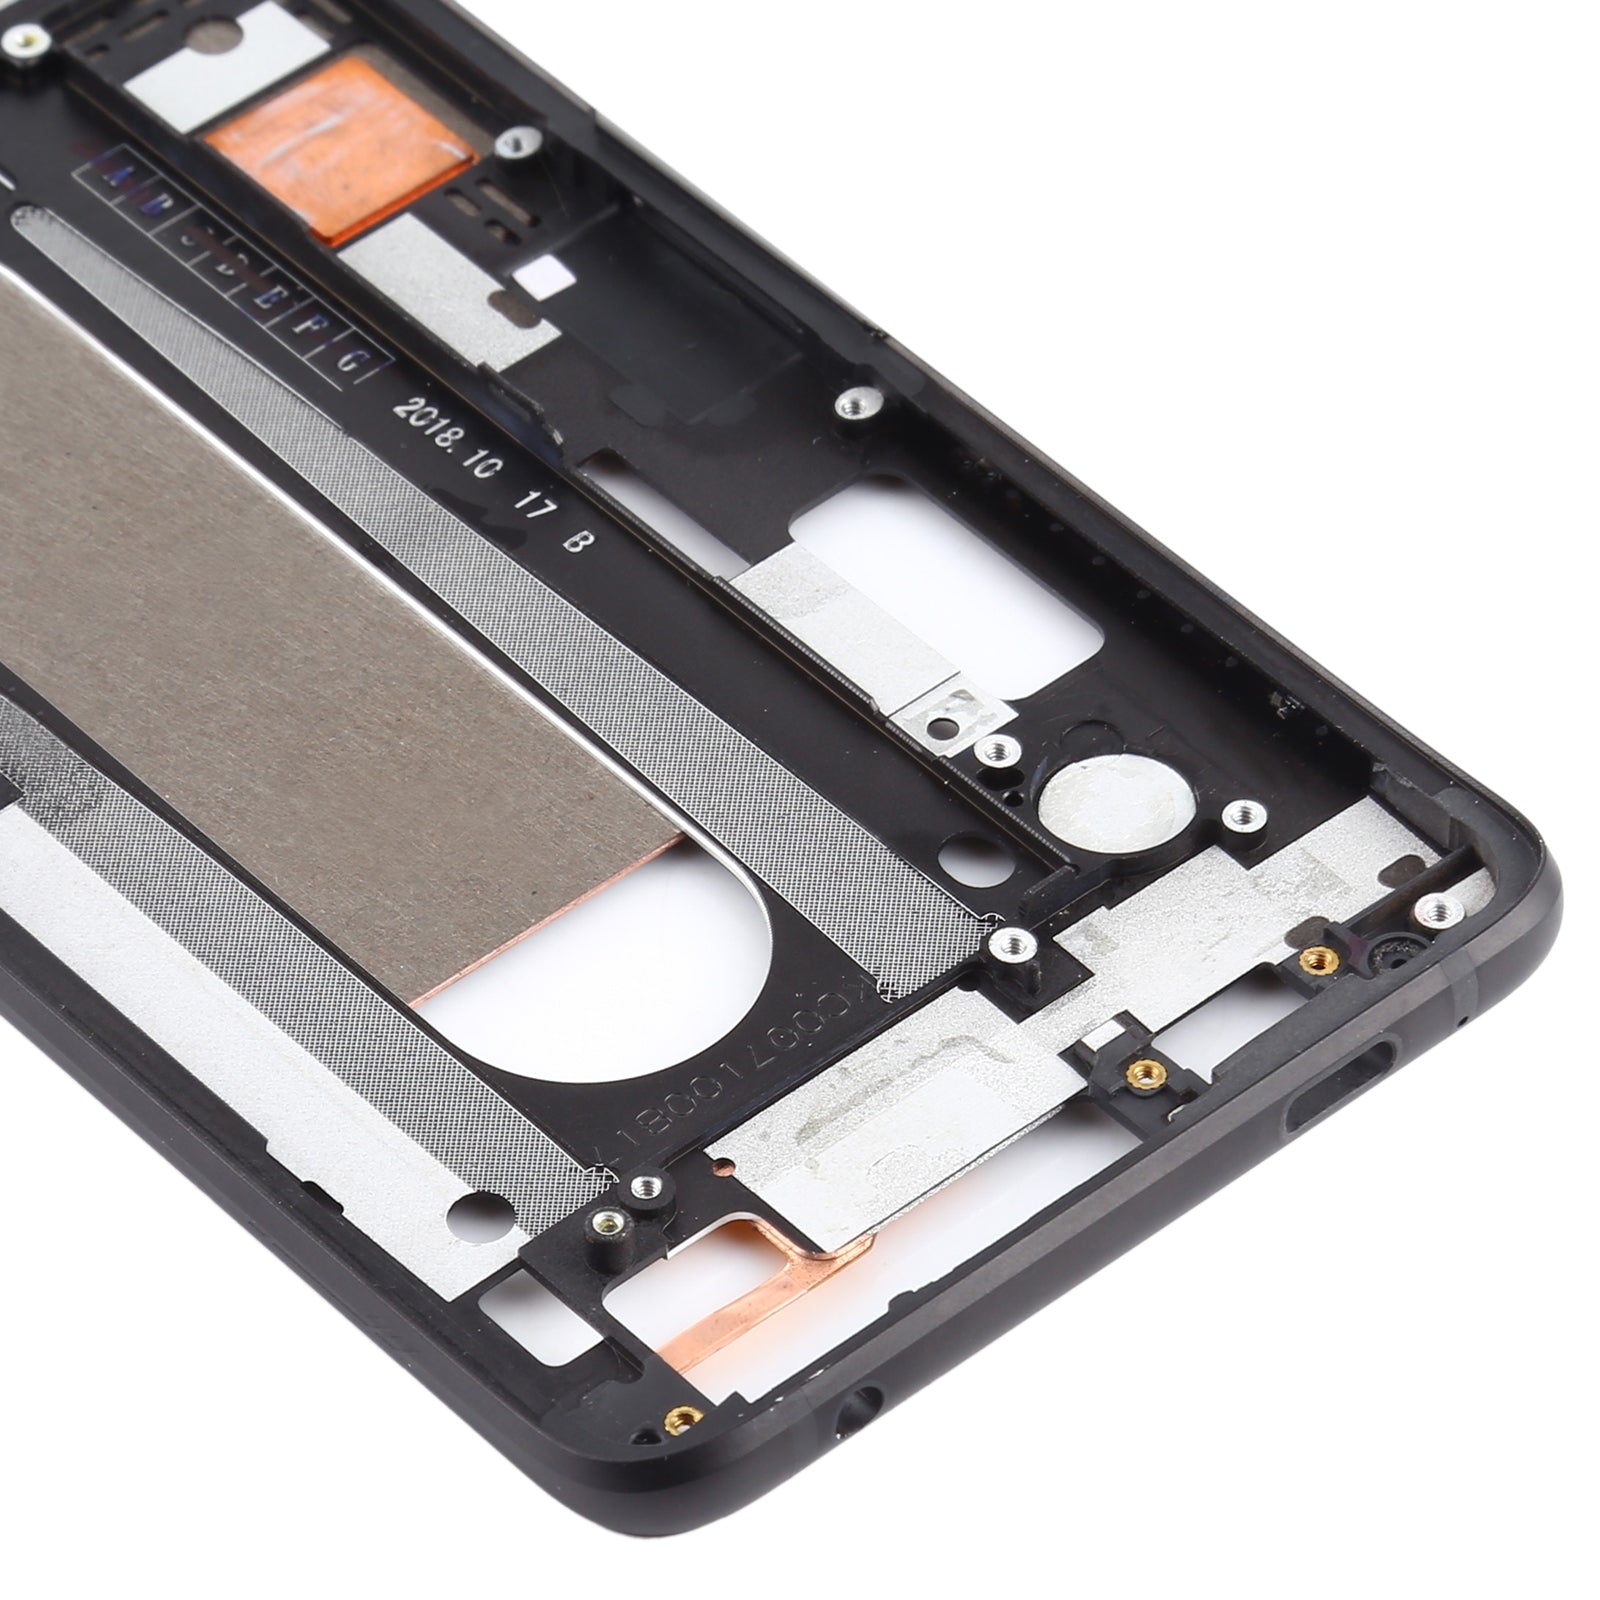 LCD Intermediate Frame Chassis Asus Rog Phone ZS600KL